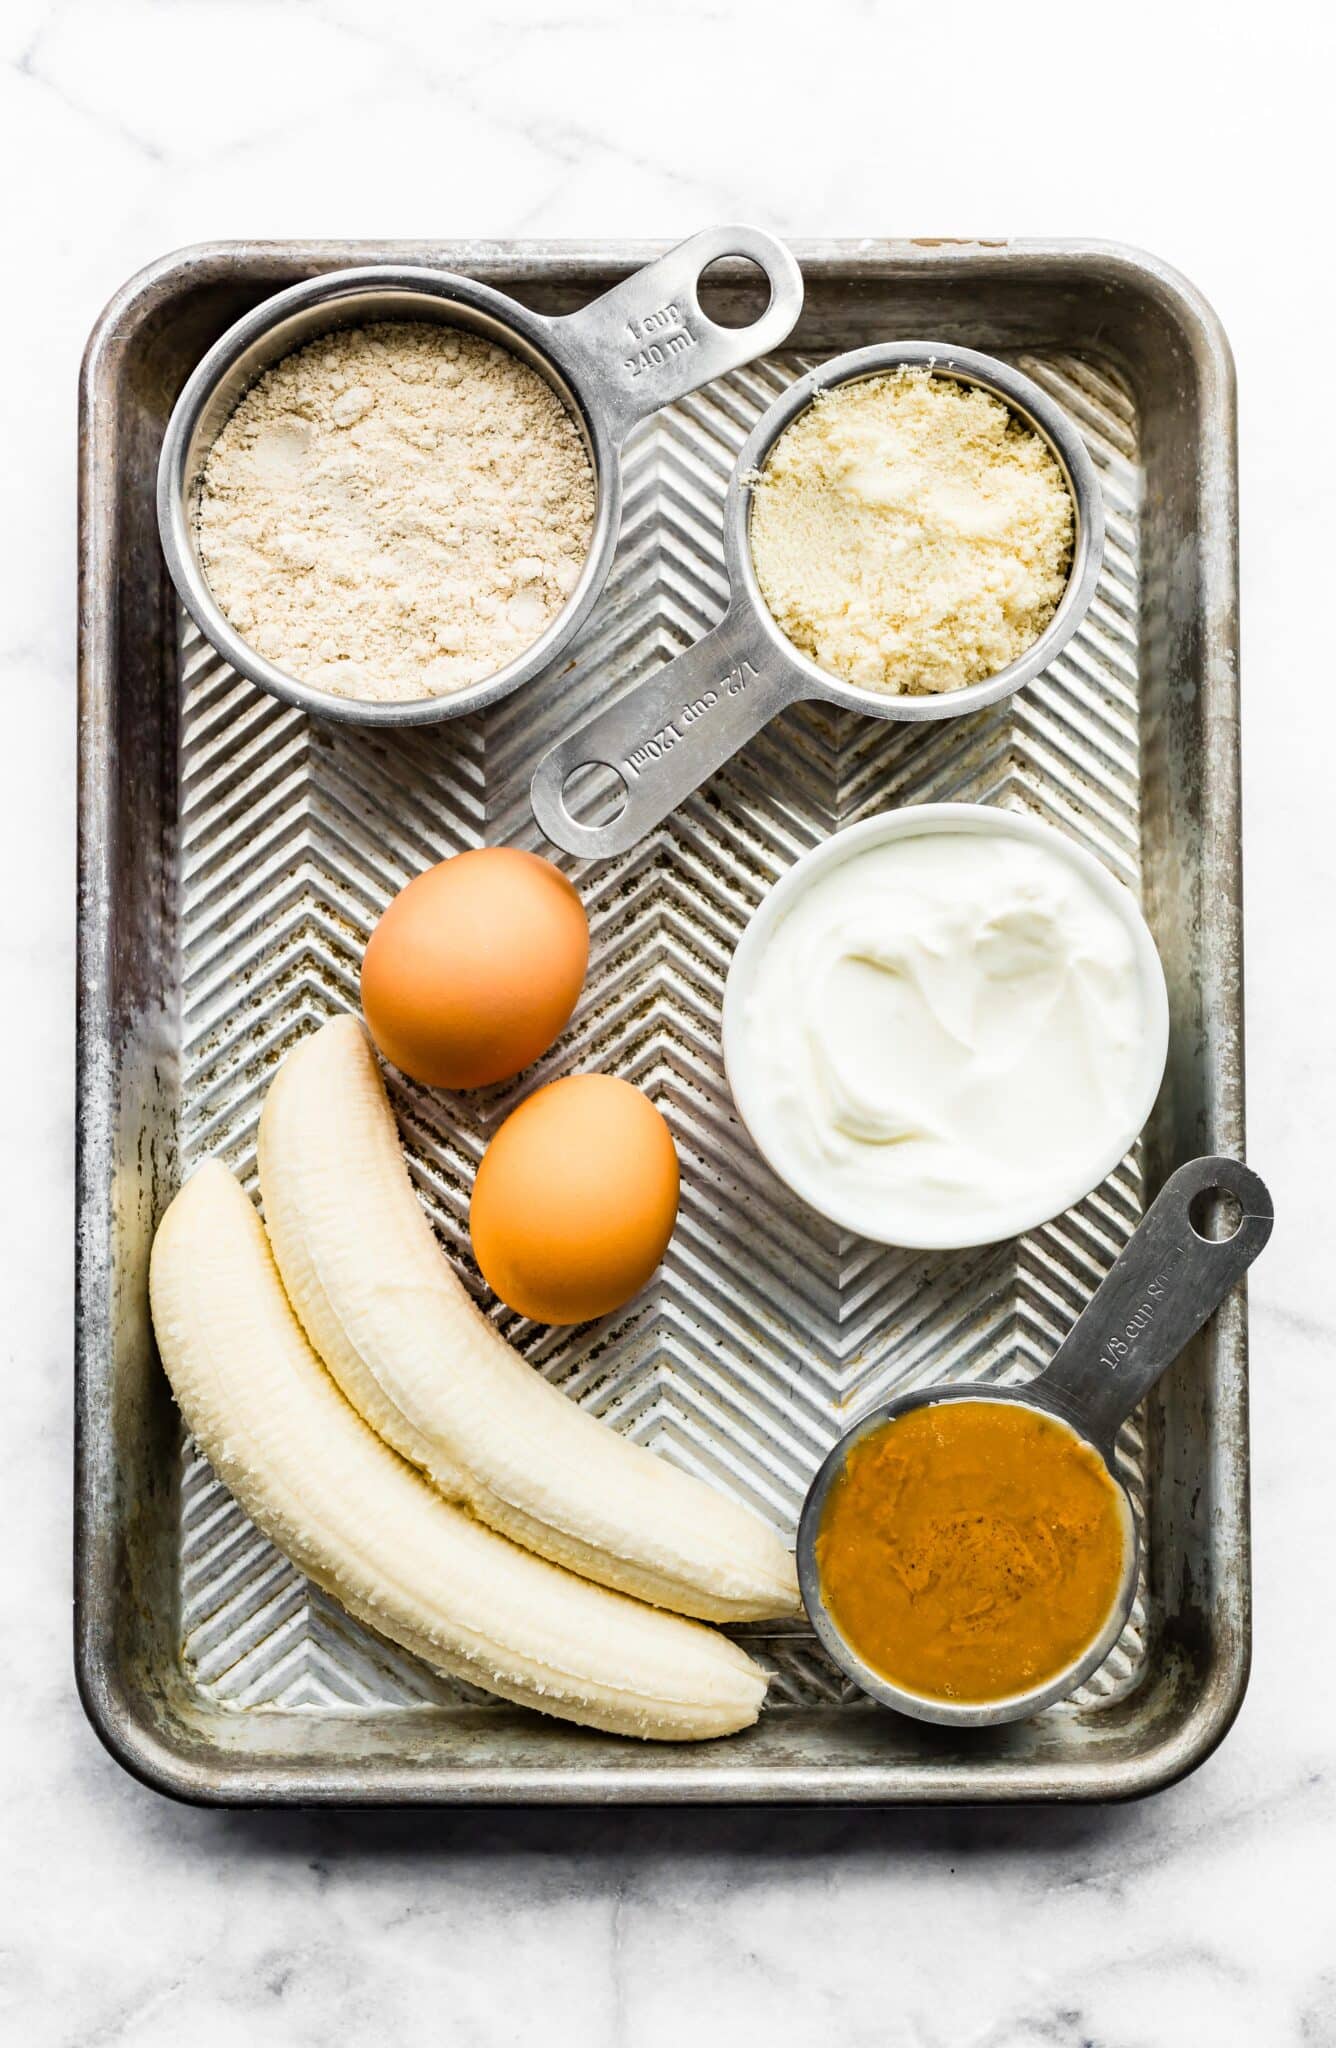 Two bananas, almond flour, eggs and nut butter on a baking sheet.